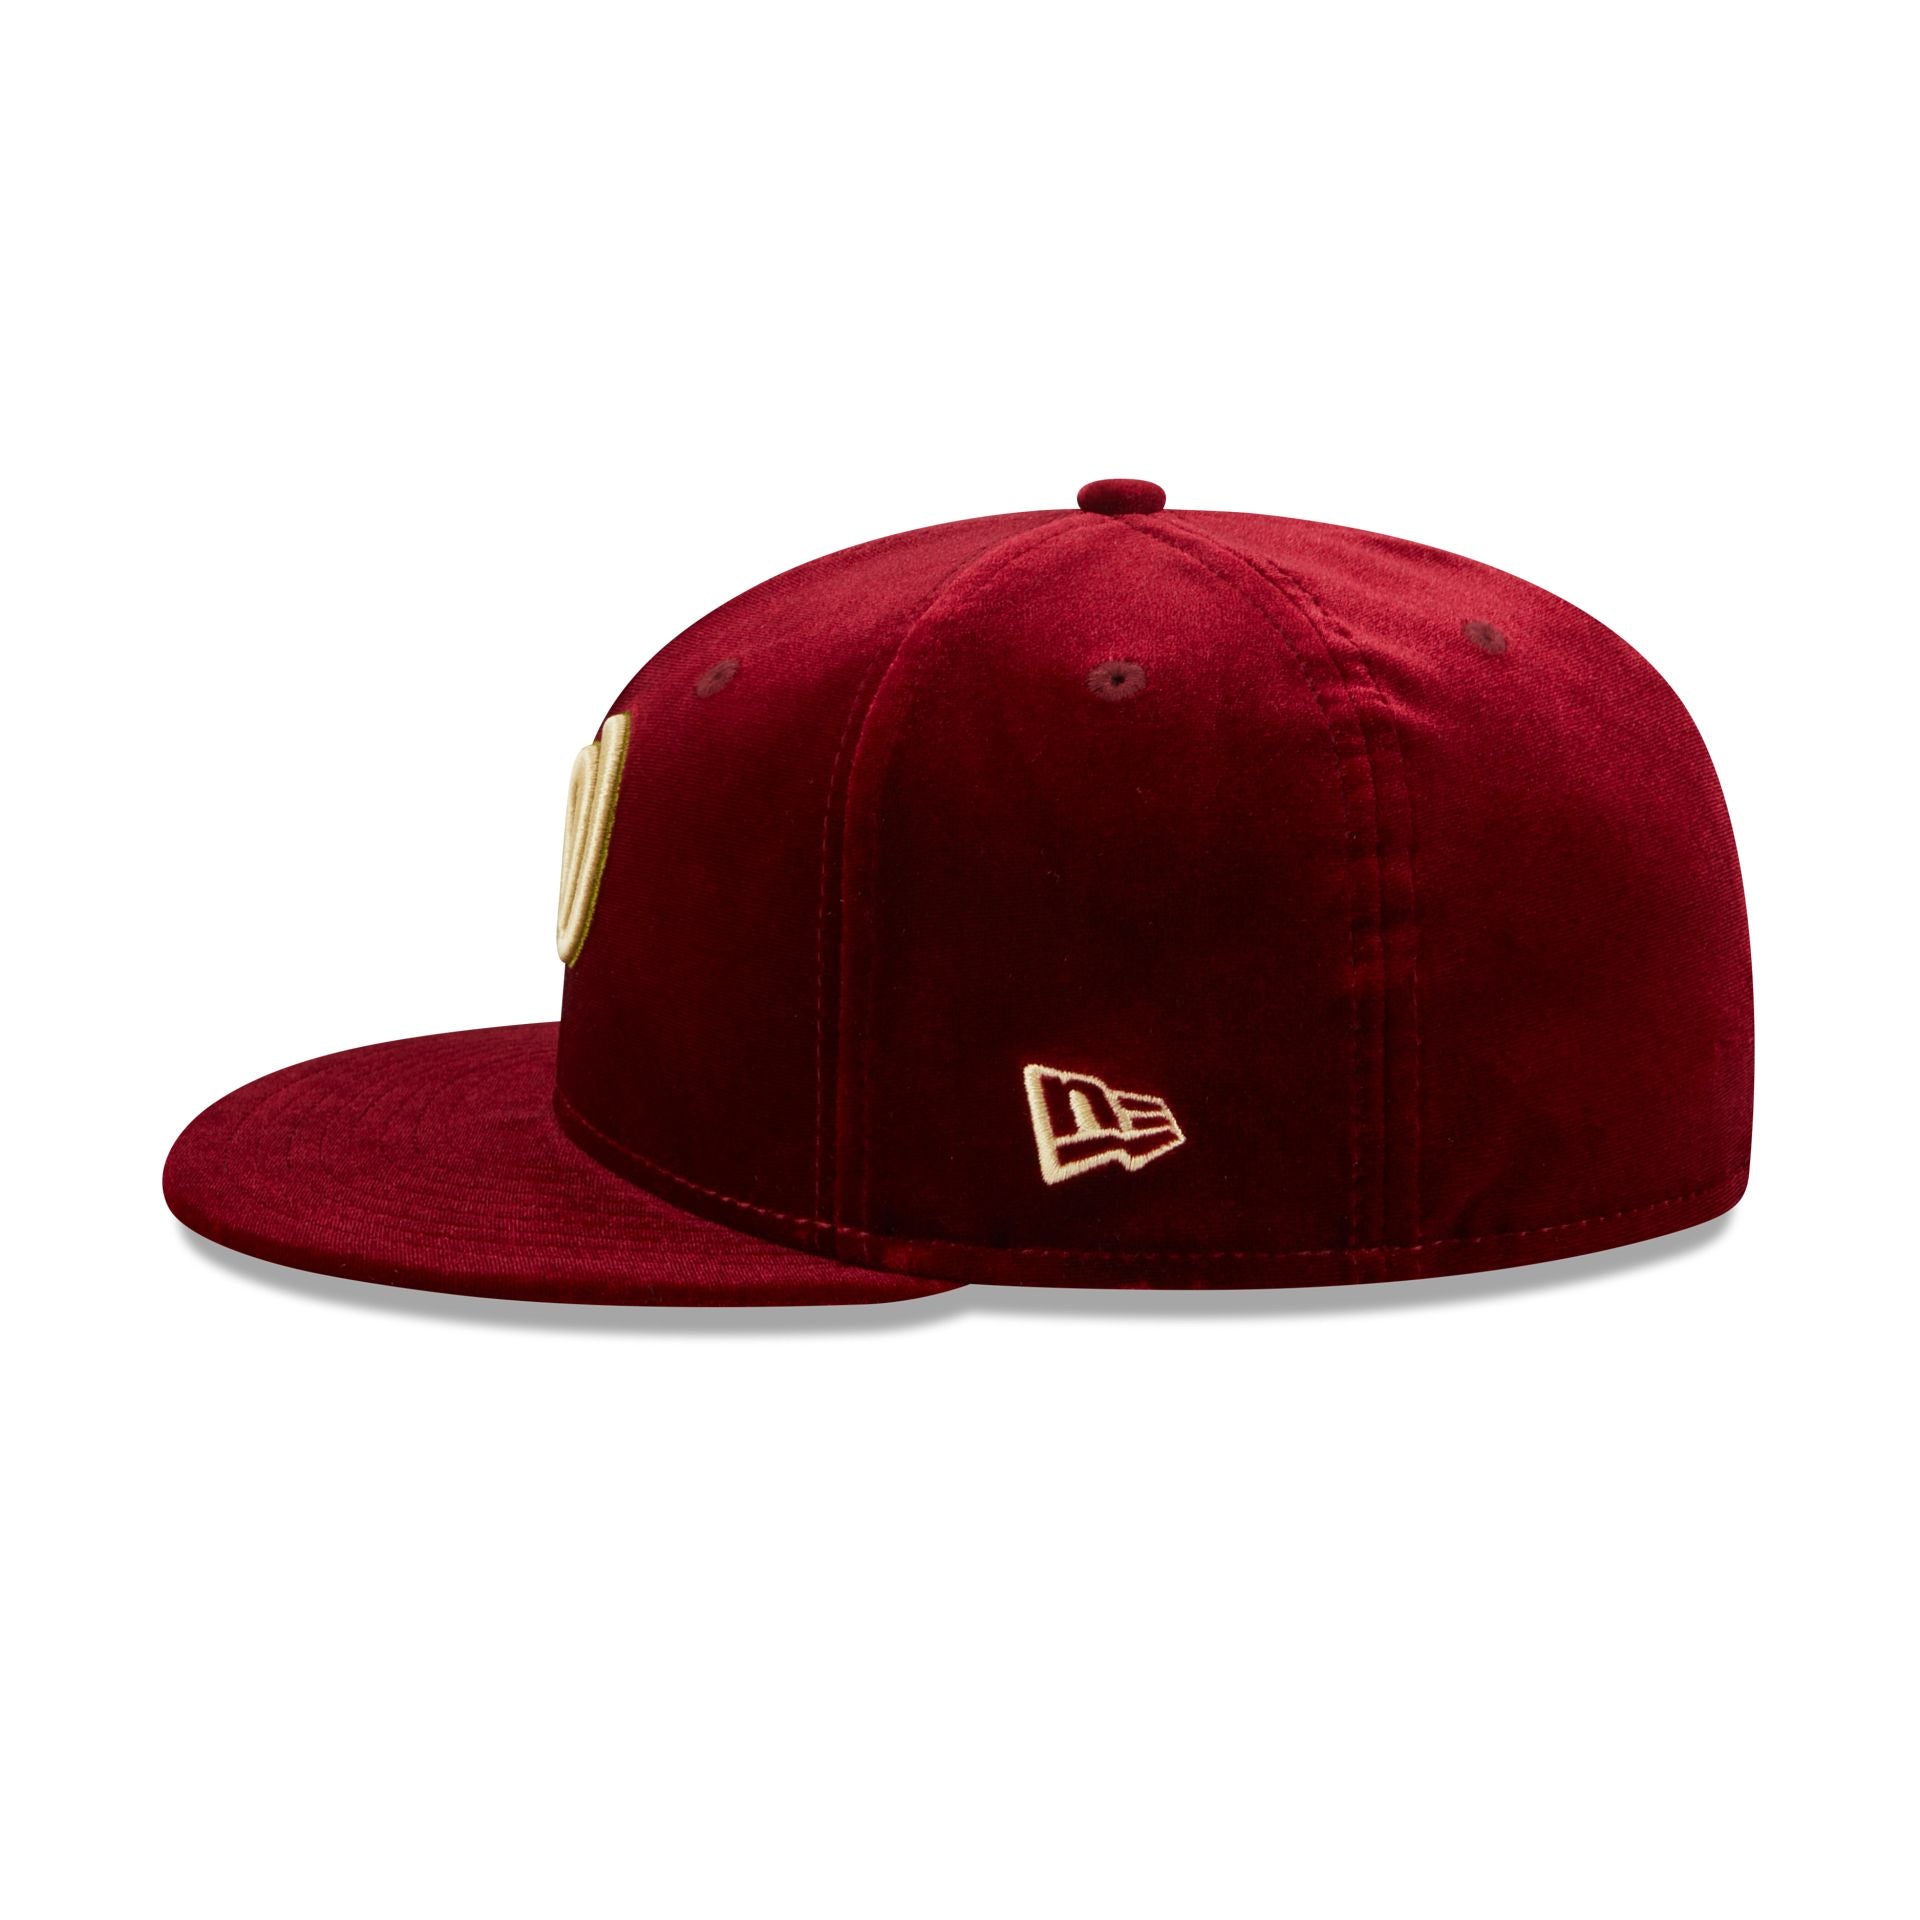 Crowns by Lids Full Court Fitted Cap - Red